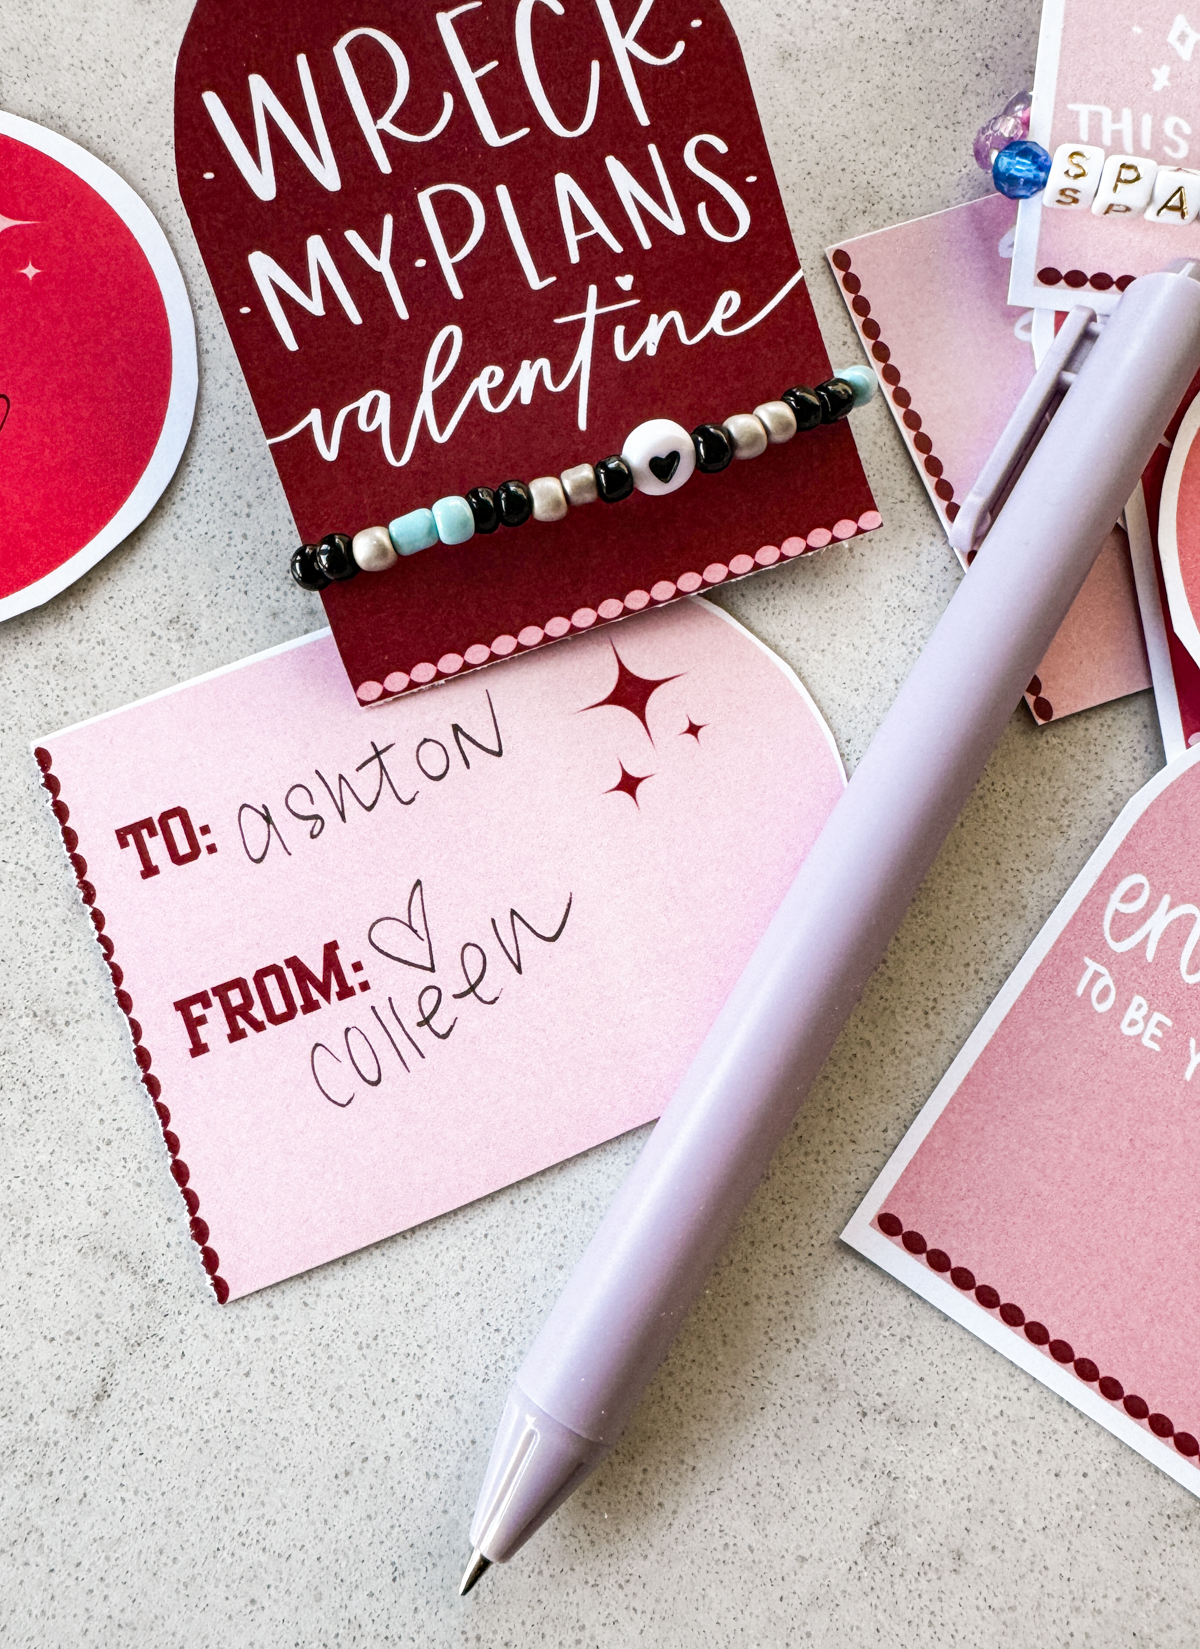 image shows printable taylor swift valentines cards. one card is shown face up with the hand lettering 'wreck my plans, valentine' from taylor swift lyrics. valentine has a heart friendship bracelet second valentine shoes reverse with space for to and from both valentines are arch shape in shades of pink and red